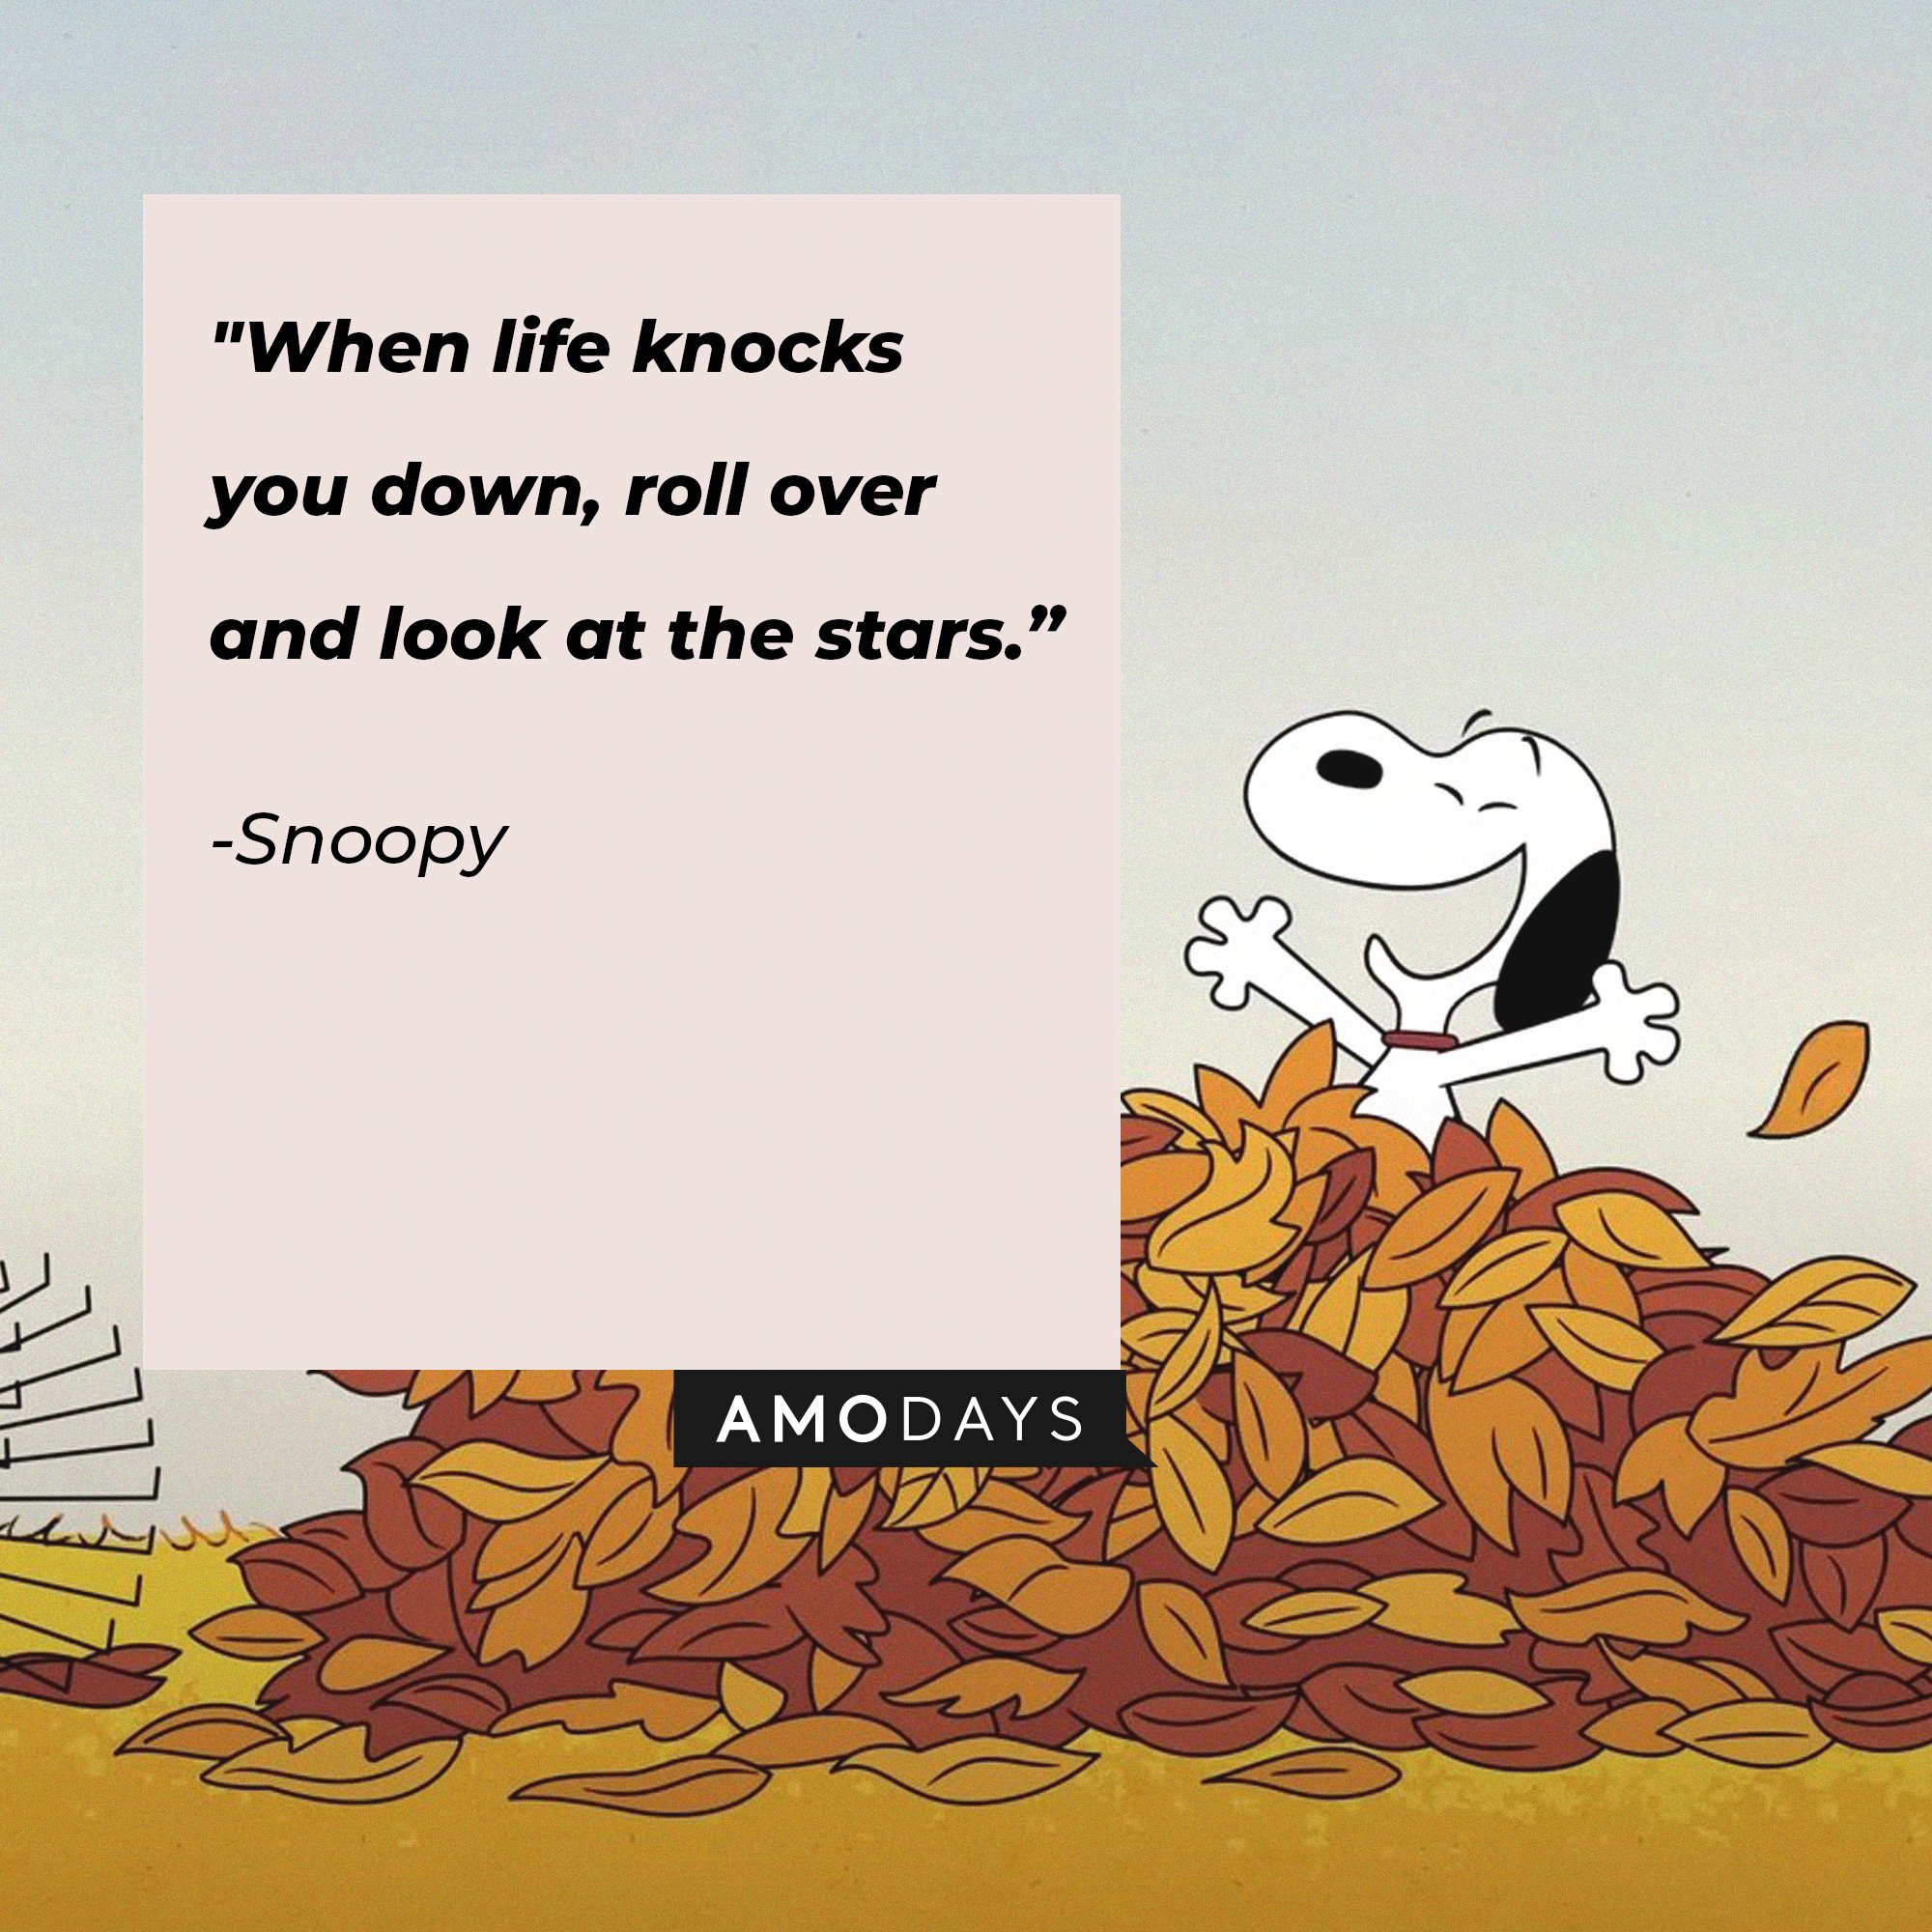 Snoopy’s quote: "When life knocks you down, roll over and look at the stars.” | Image: AmoDays